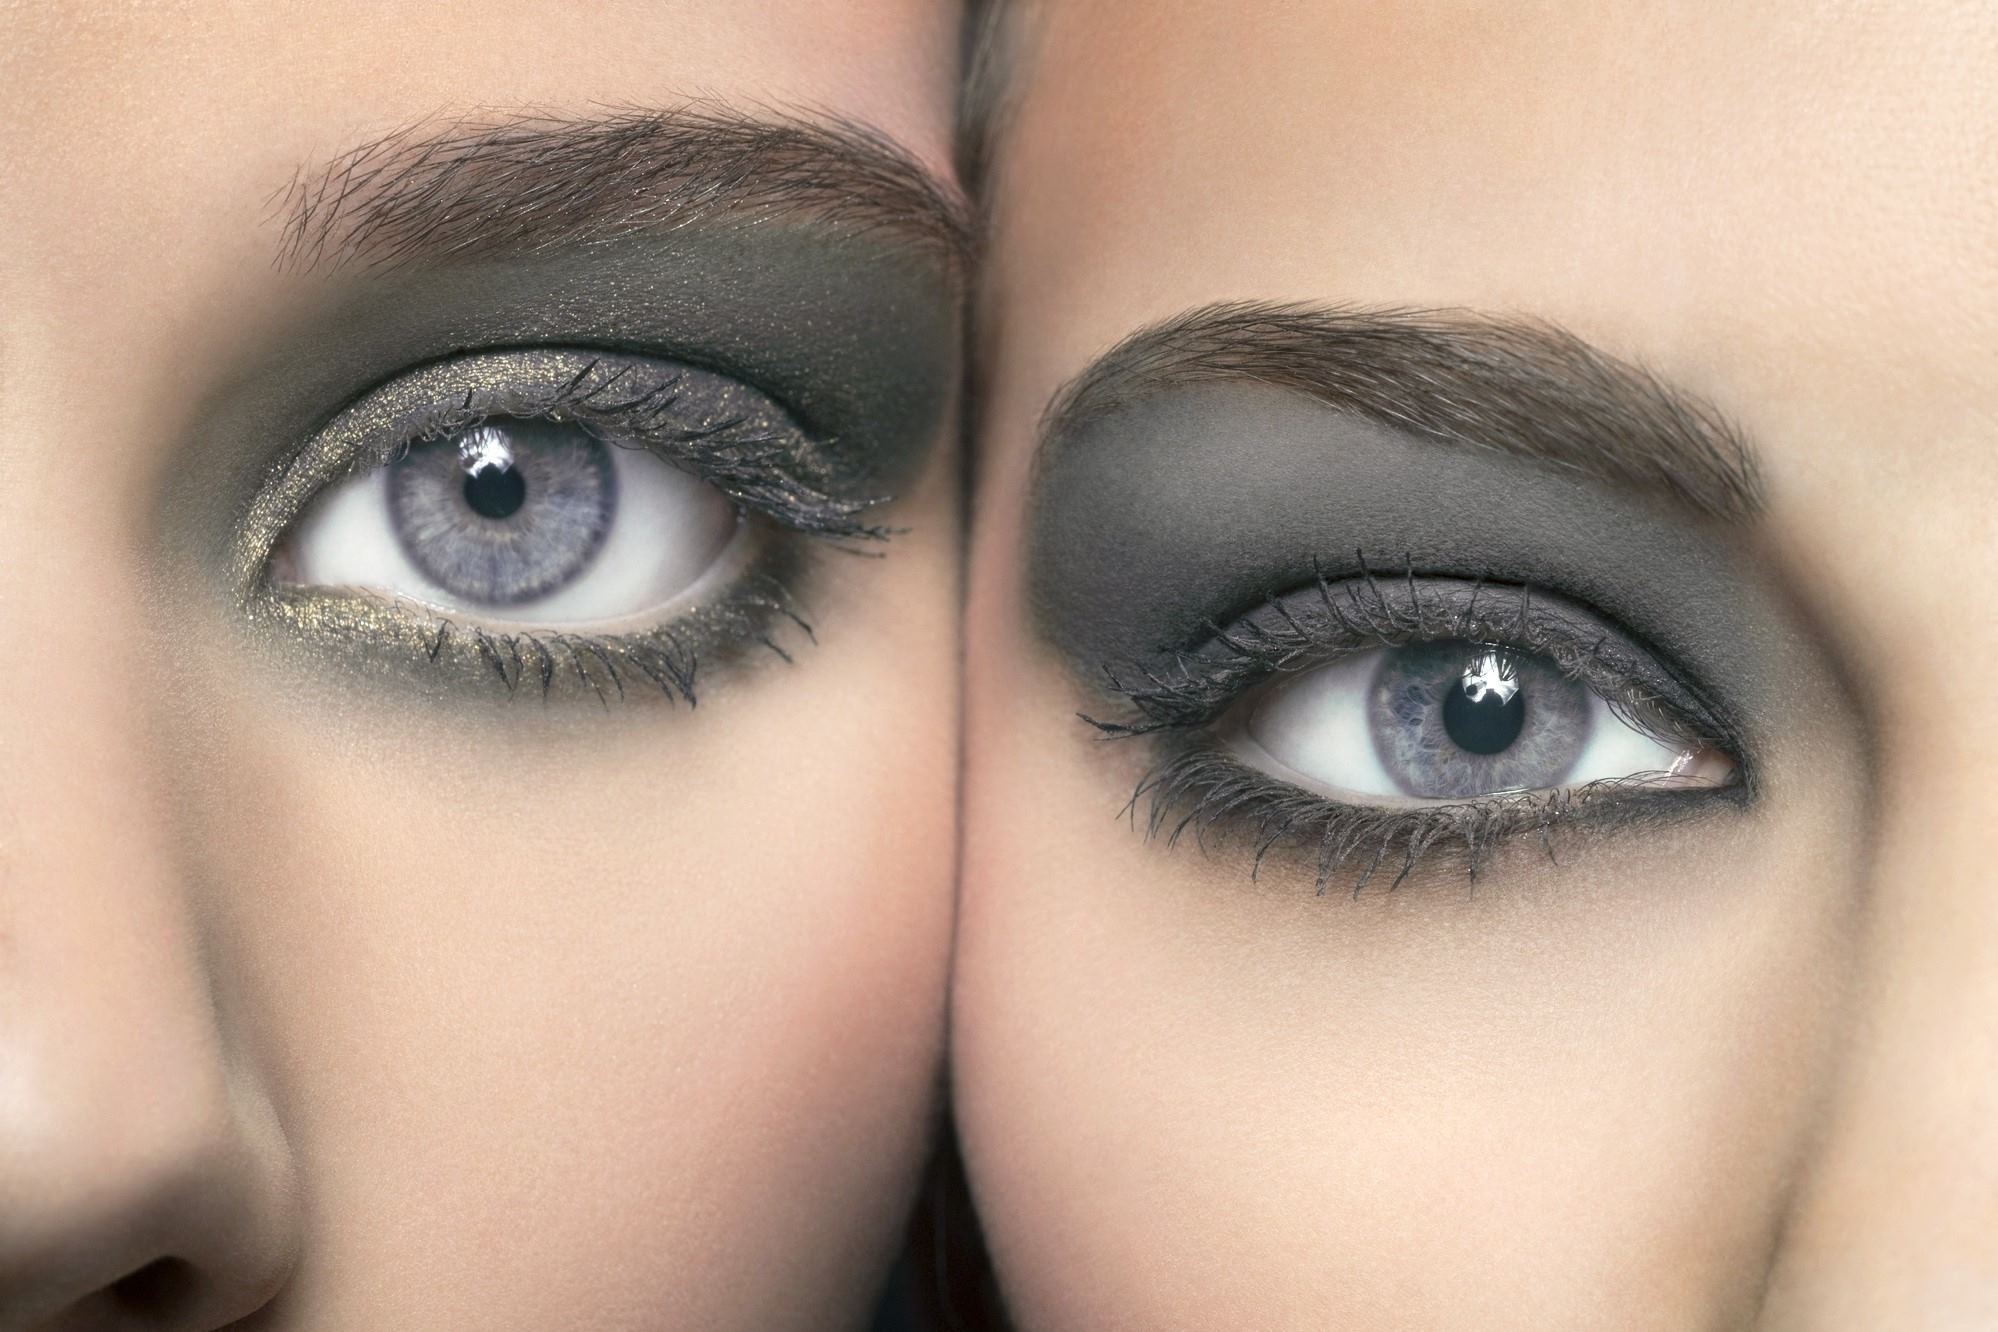 The Perfect Eyeliner And Eyeshadow For Light Blue Grey Eyes!